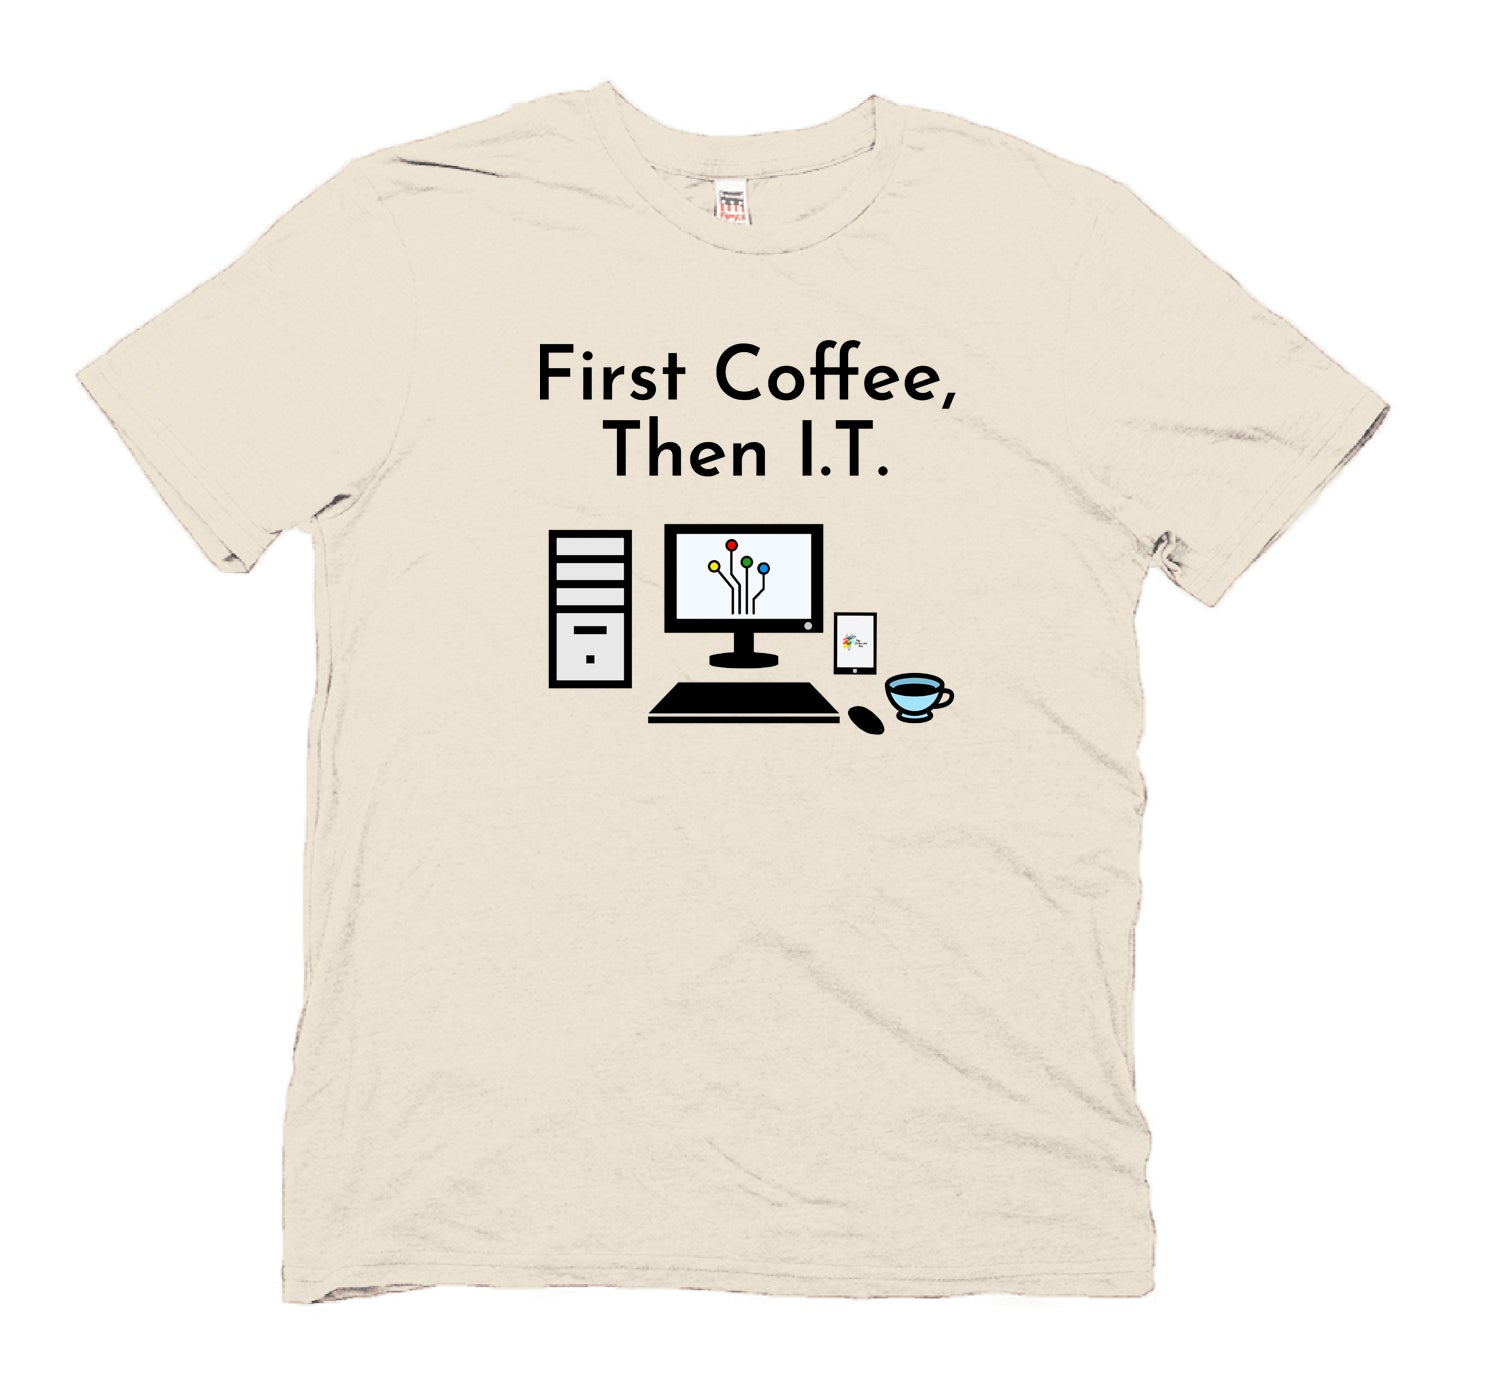 Information Technology T Shirt First Coffee Then I.T. by The Office Art Guy, natural color